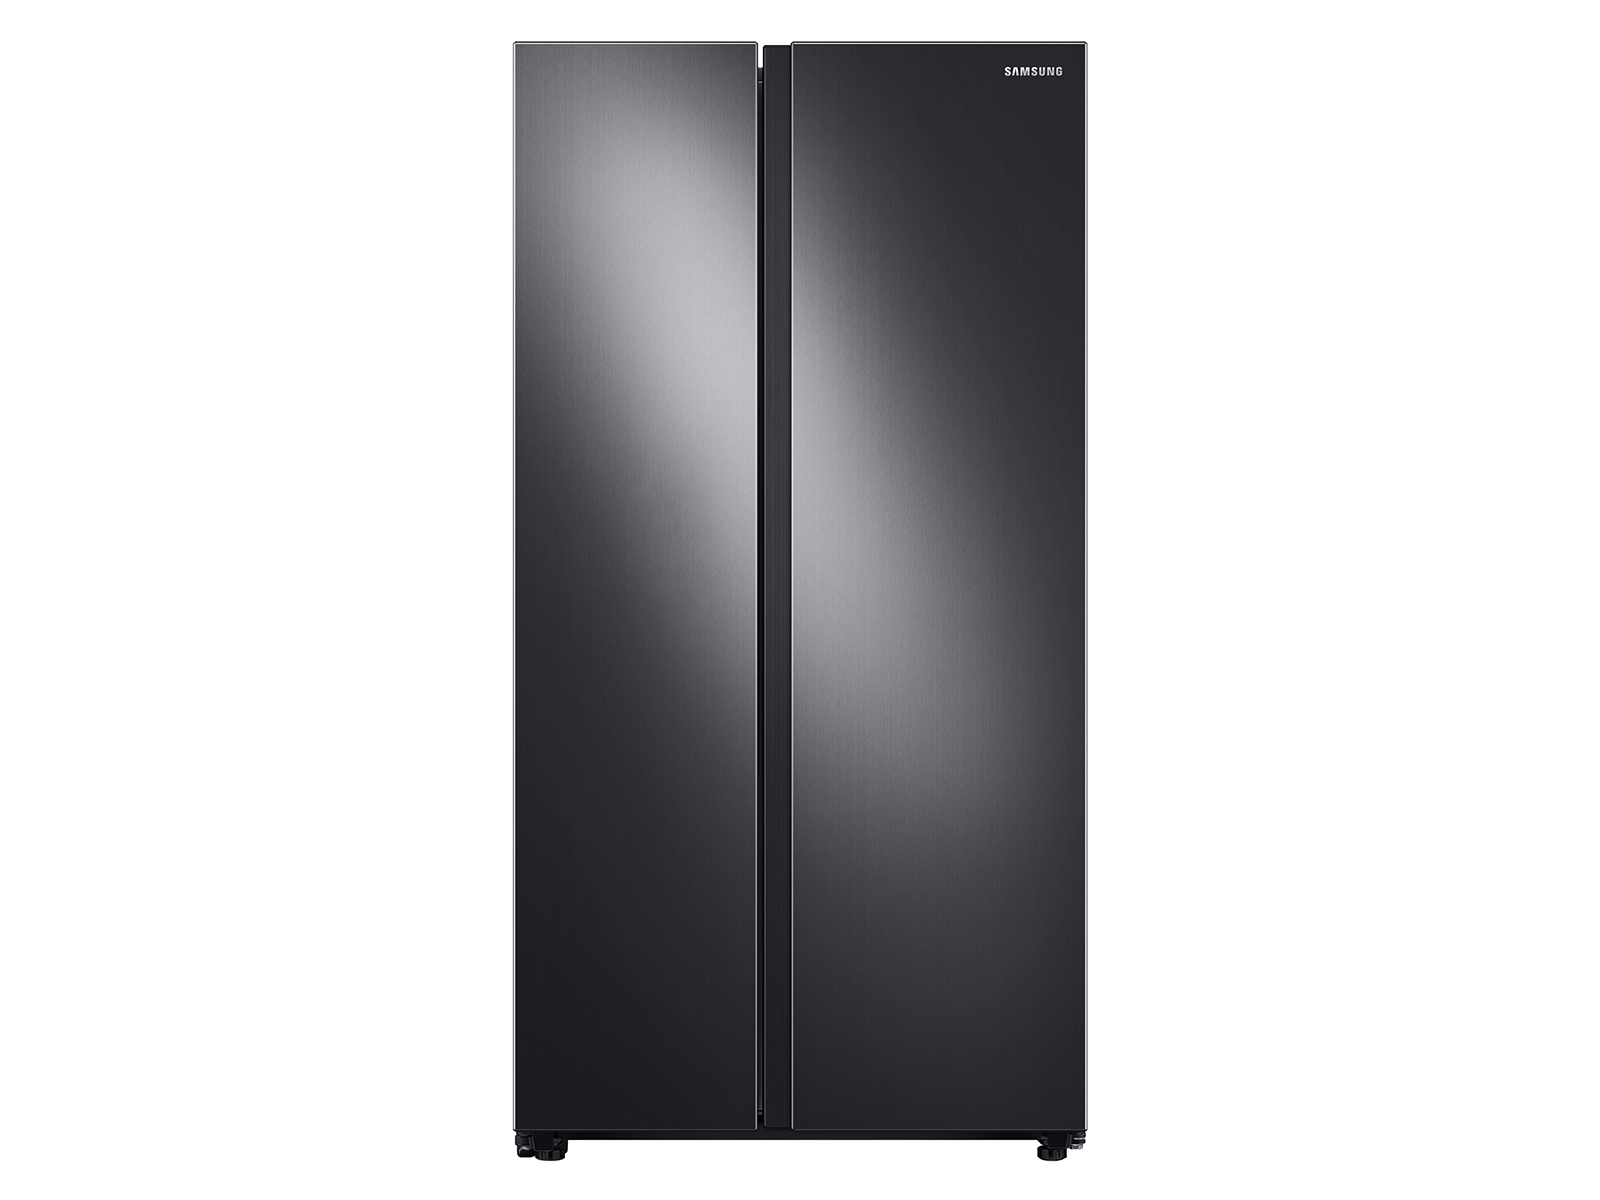 Photos - Fridge Samsung 28 cu. ft. Smart Side-by-Side Refrigerator in Black Stainless Stee 